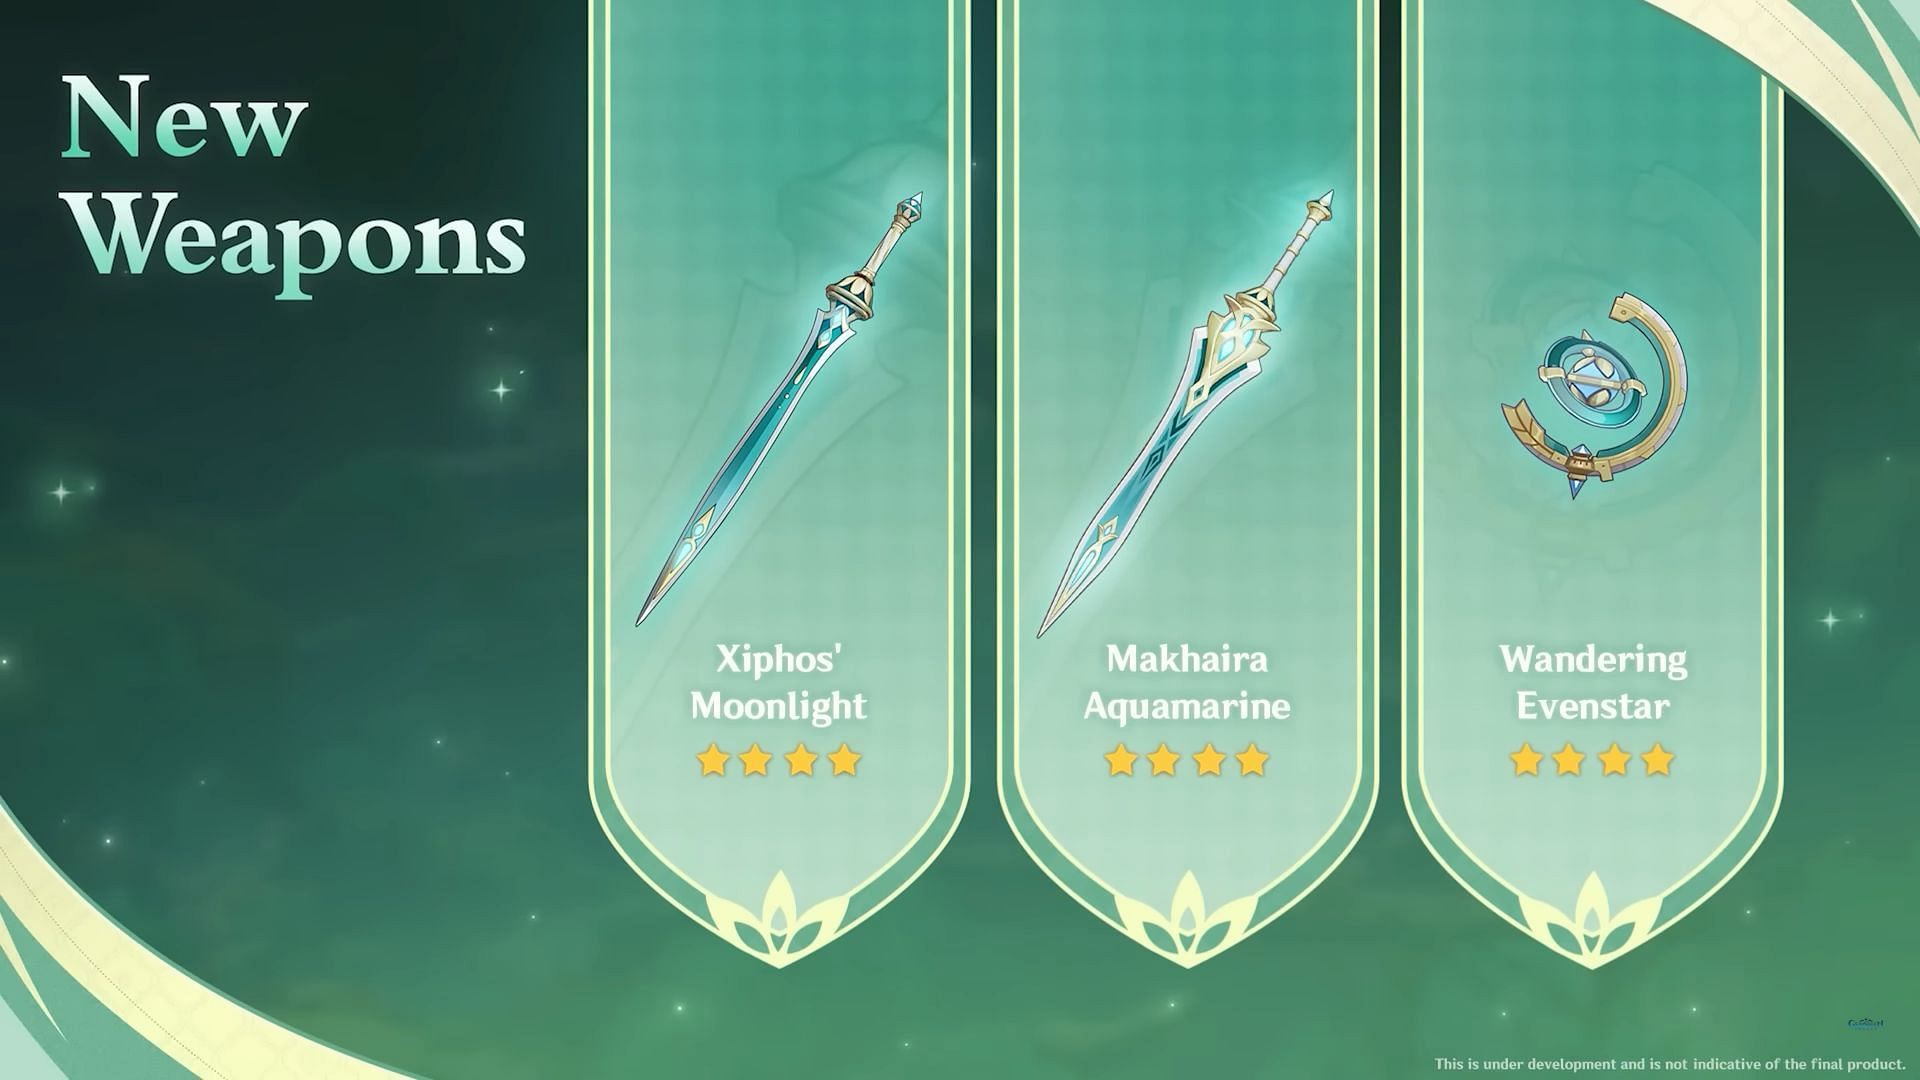 New 4-star weapons are coming to 3.1 banners (Image via Genshin Impact)